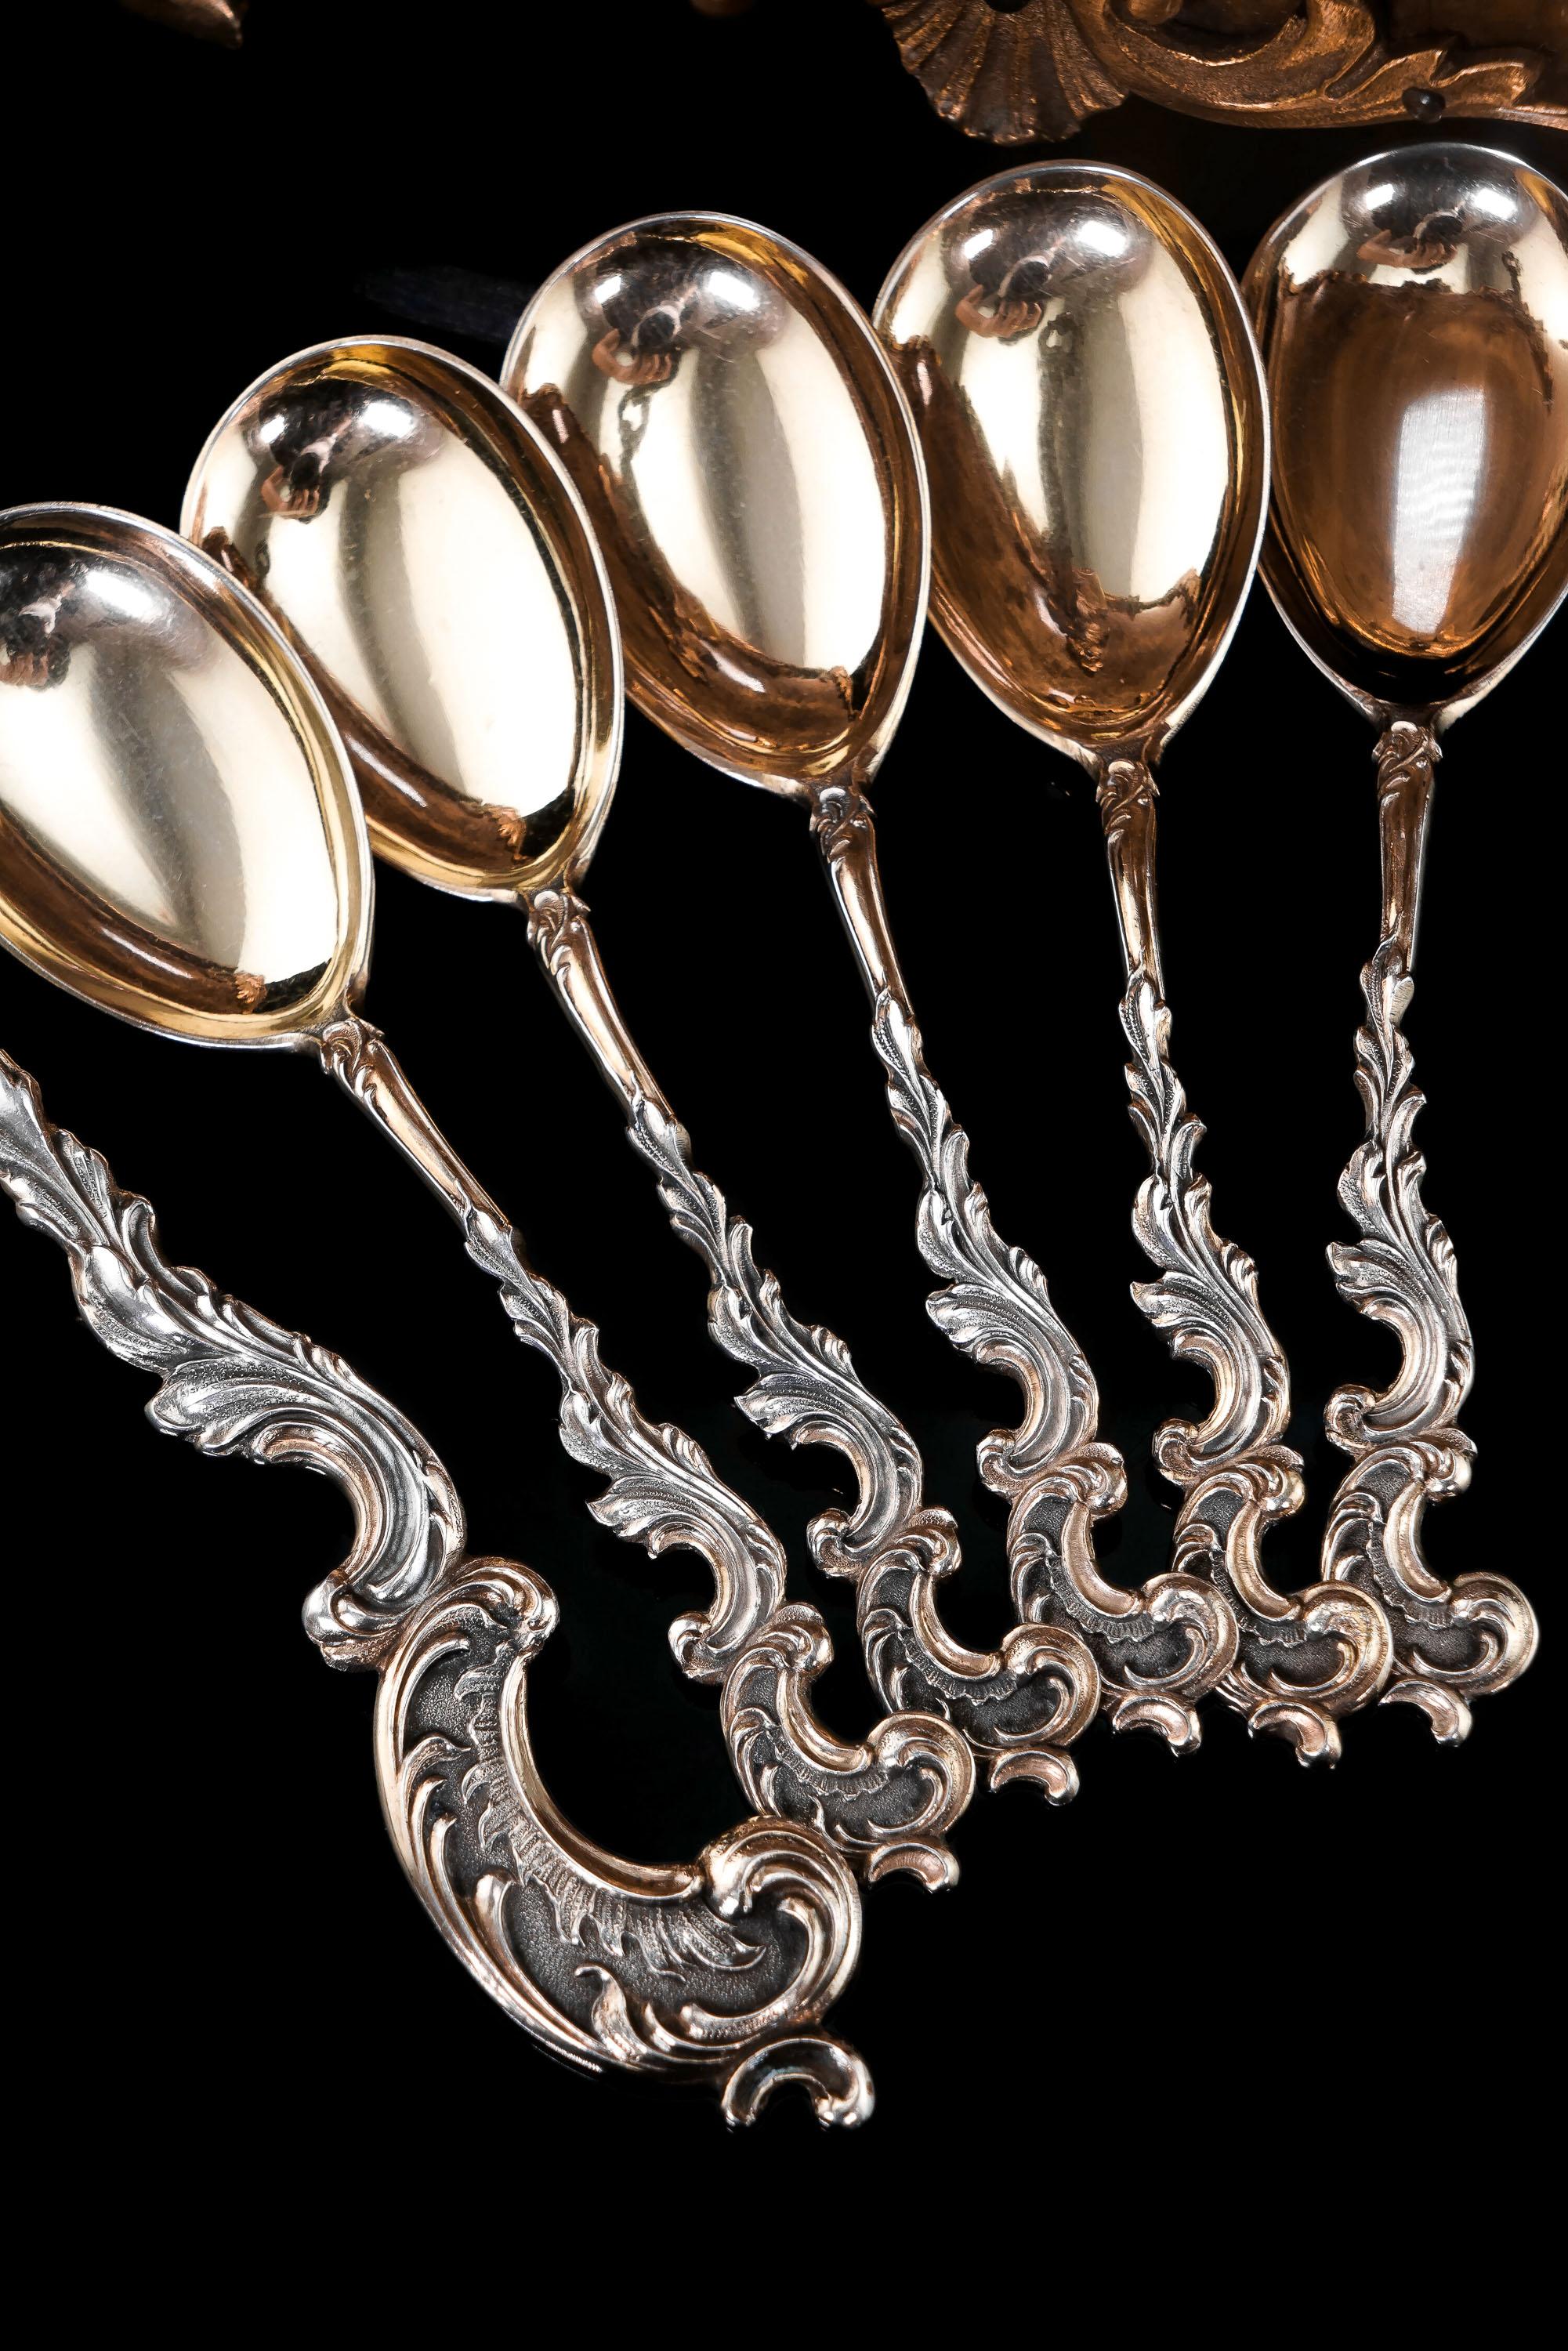 Antique German Solid Silver Icecream Server & Spoons in Rococo Style - c.1900 For Sale 12